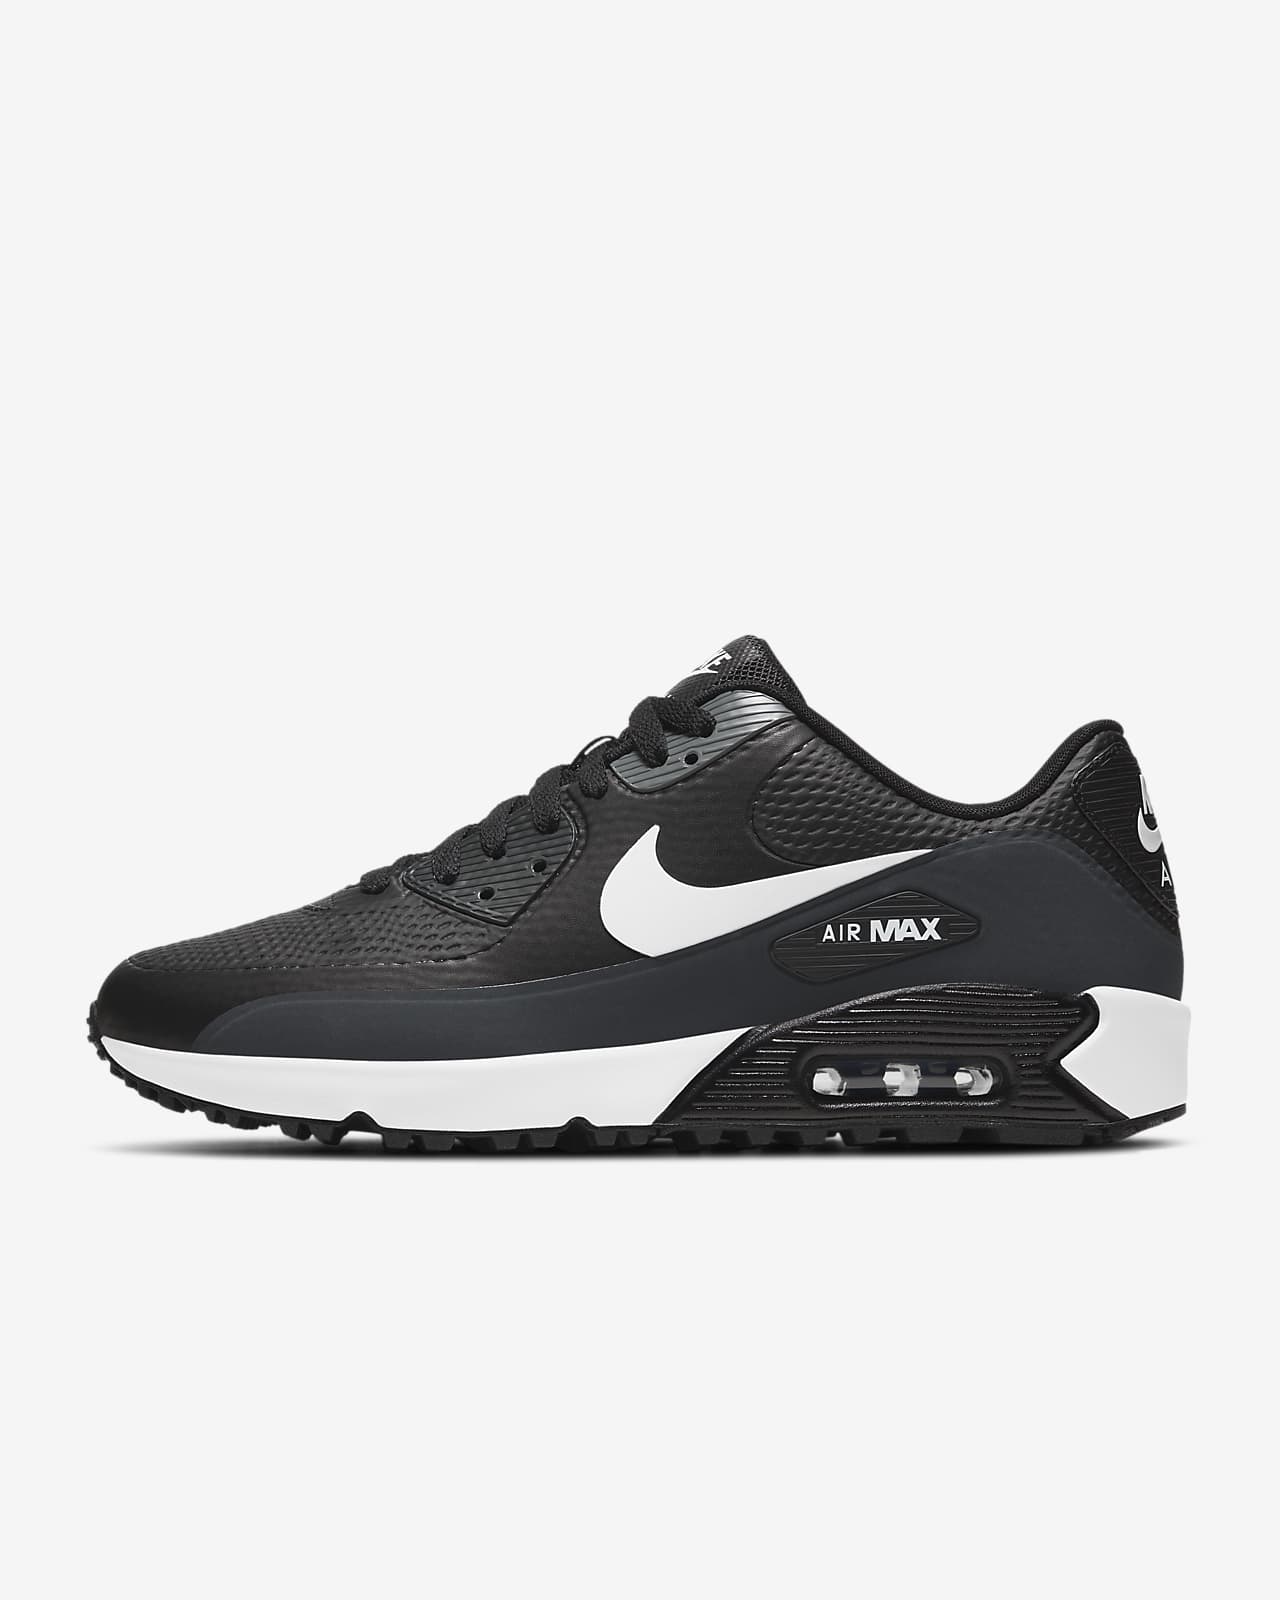 Nike Air Max 90 G Golf Shoes Review